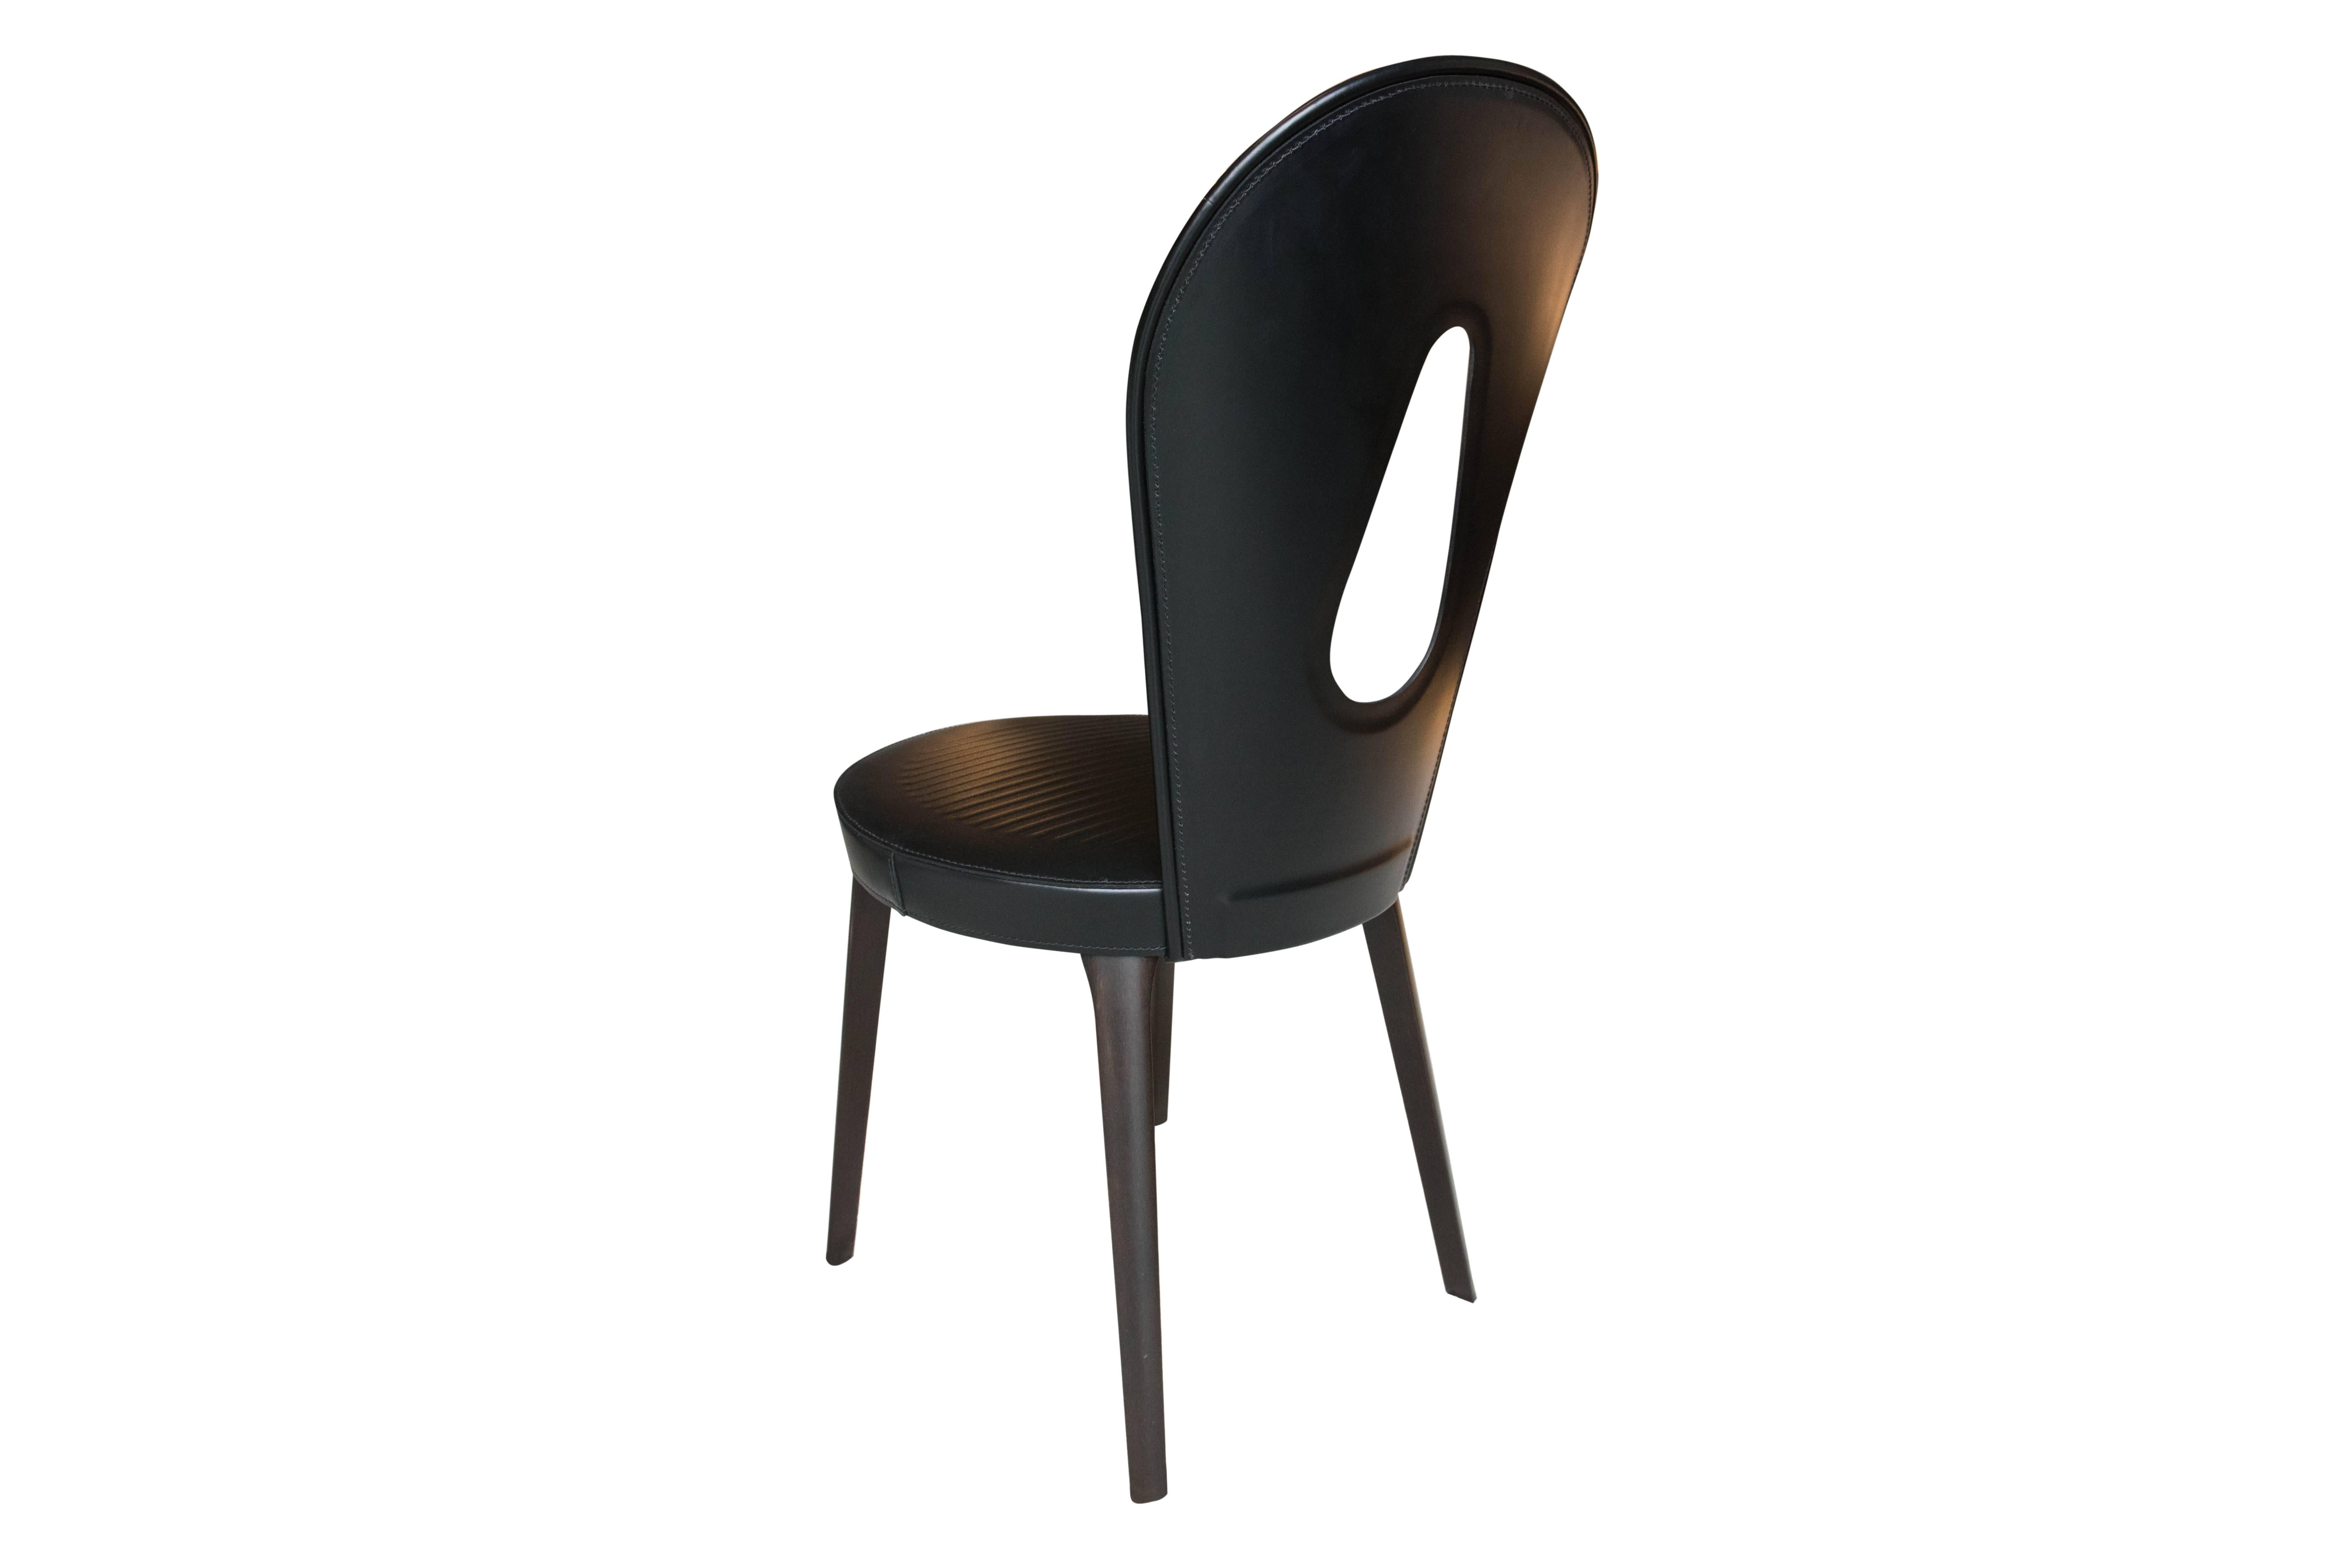 A dining chair with the legs in solid polished beech wood and the seat in multilayer beech wood. The padding is in multi-density polyurethane foam. The backrest structure is in curved aluminium. The saddle leather covering is available in various